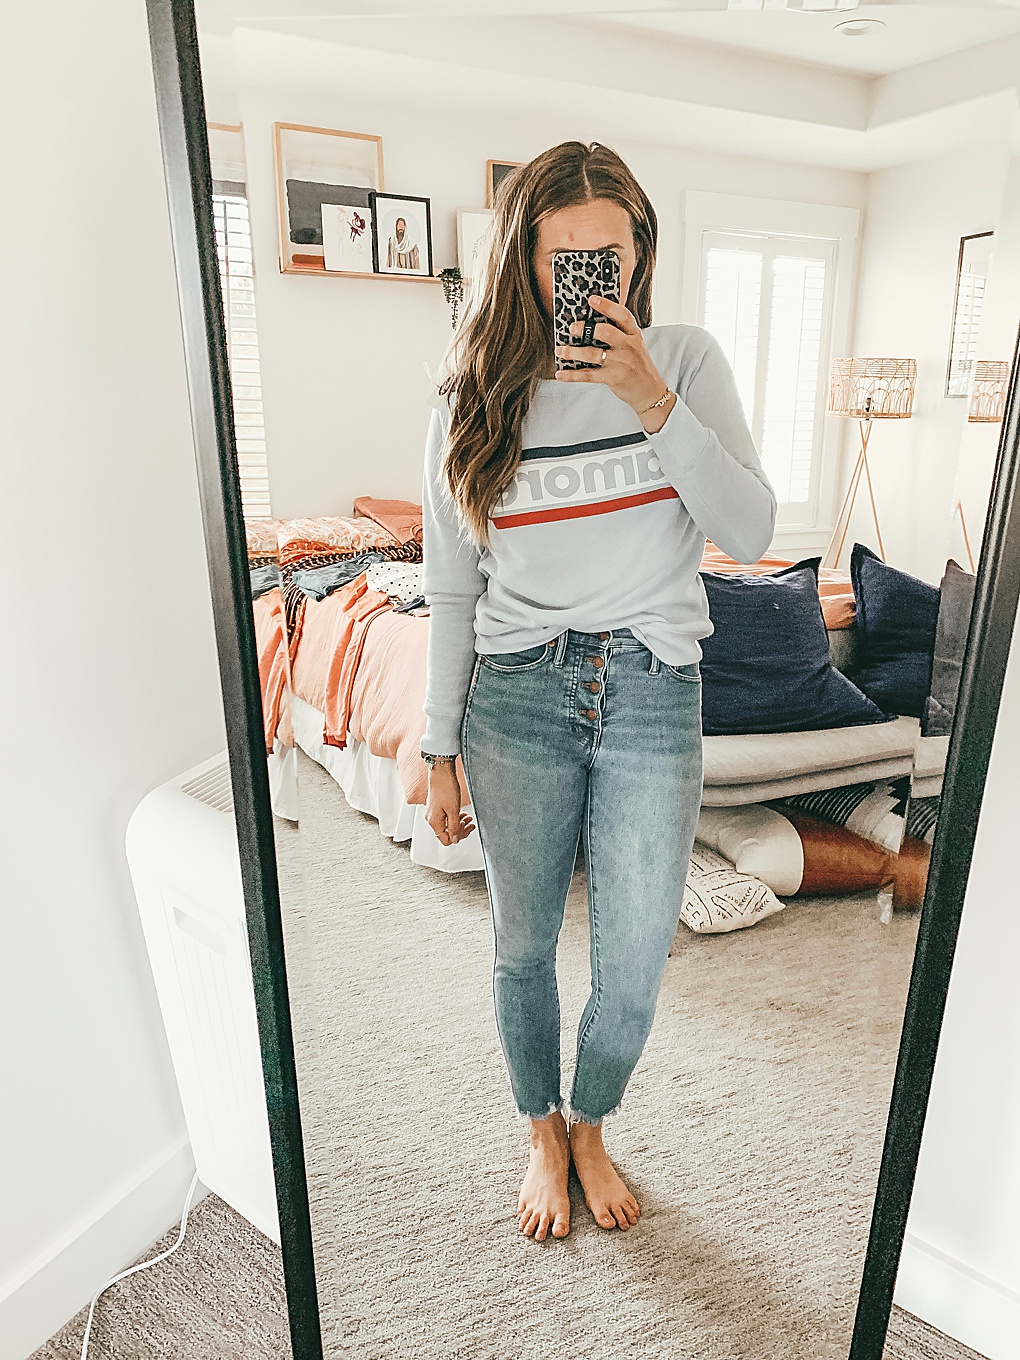 Heading to Old Navy soon? Utah Style blogger Dani Marie is sharing her top picks this month in her Old Navy Try-On for August. See them here!